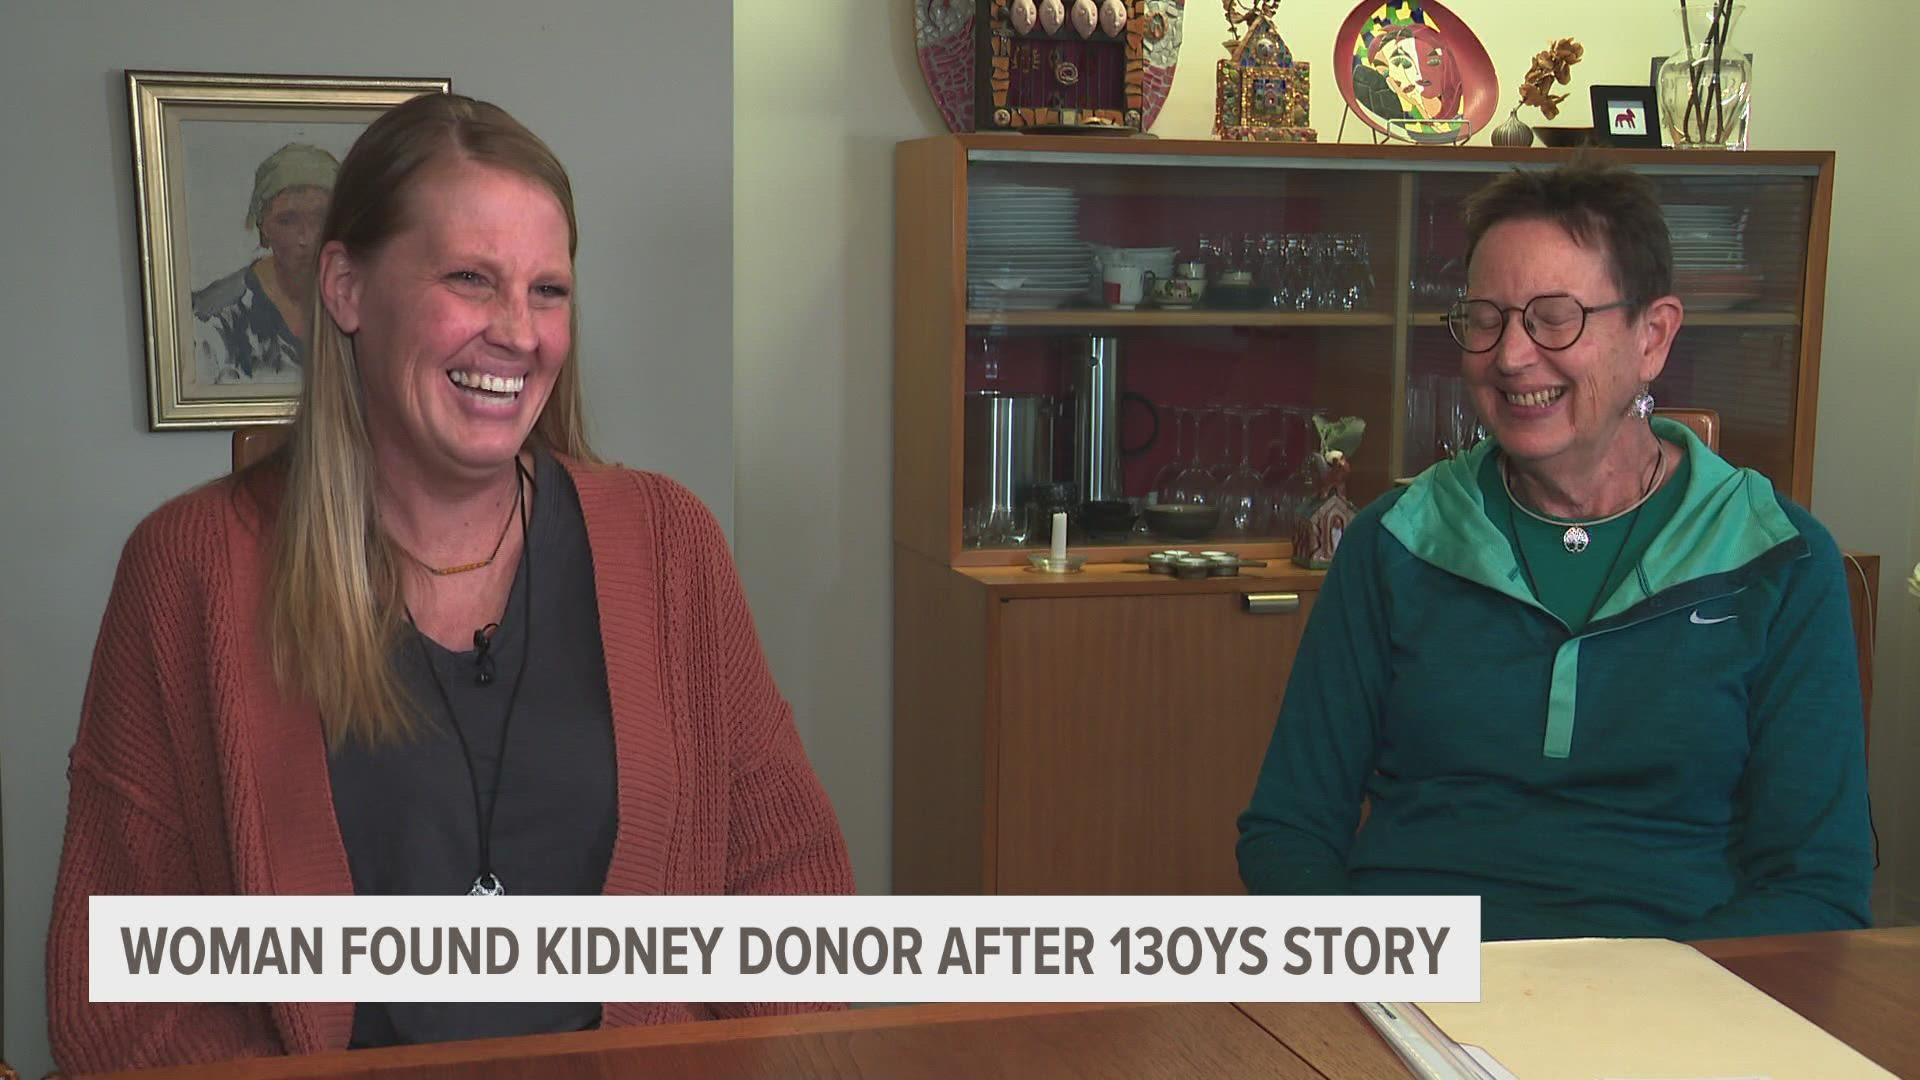 We first introduced you to Linda Griggs in June, looking for a kidney donor. Thankfully, Rachel Snyder was watching TV at the right moment.